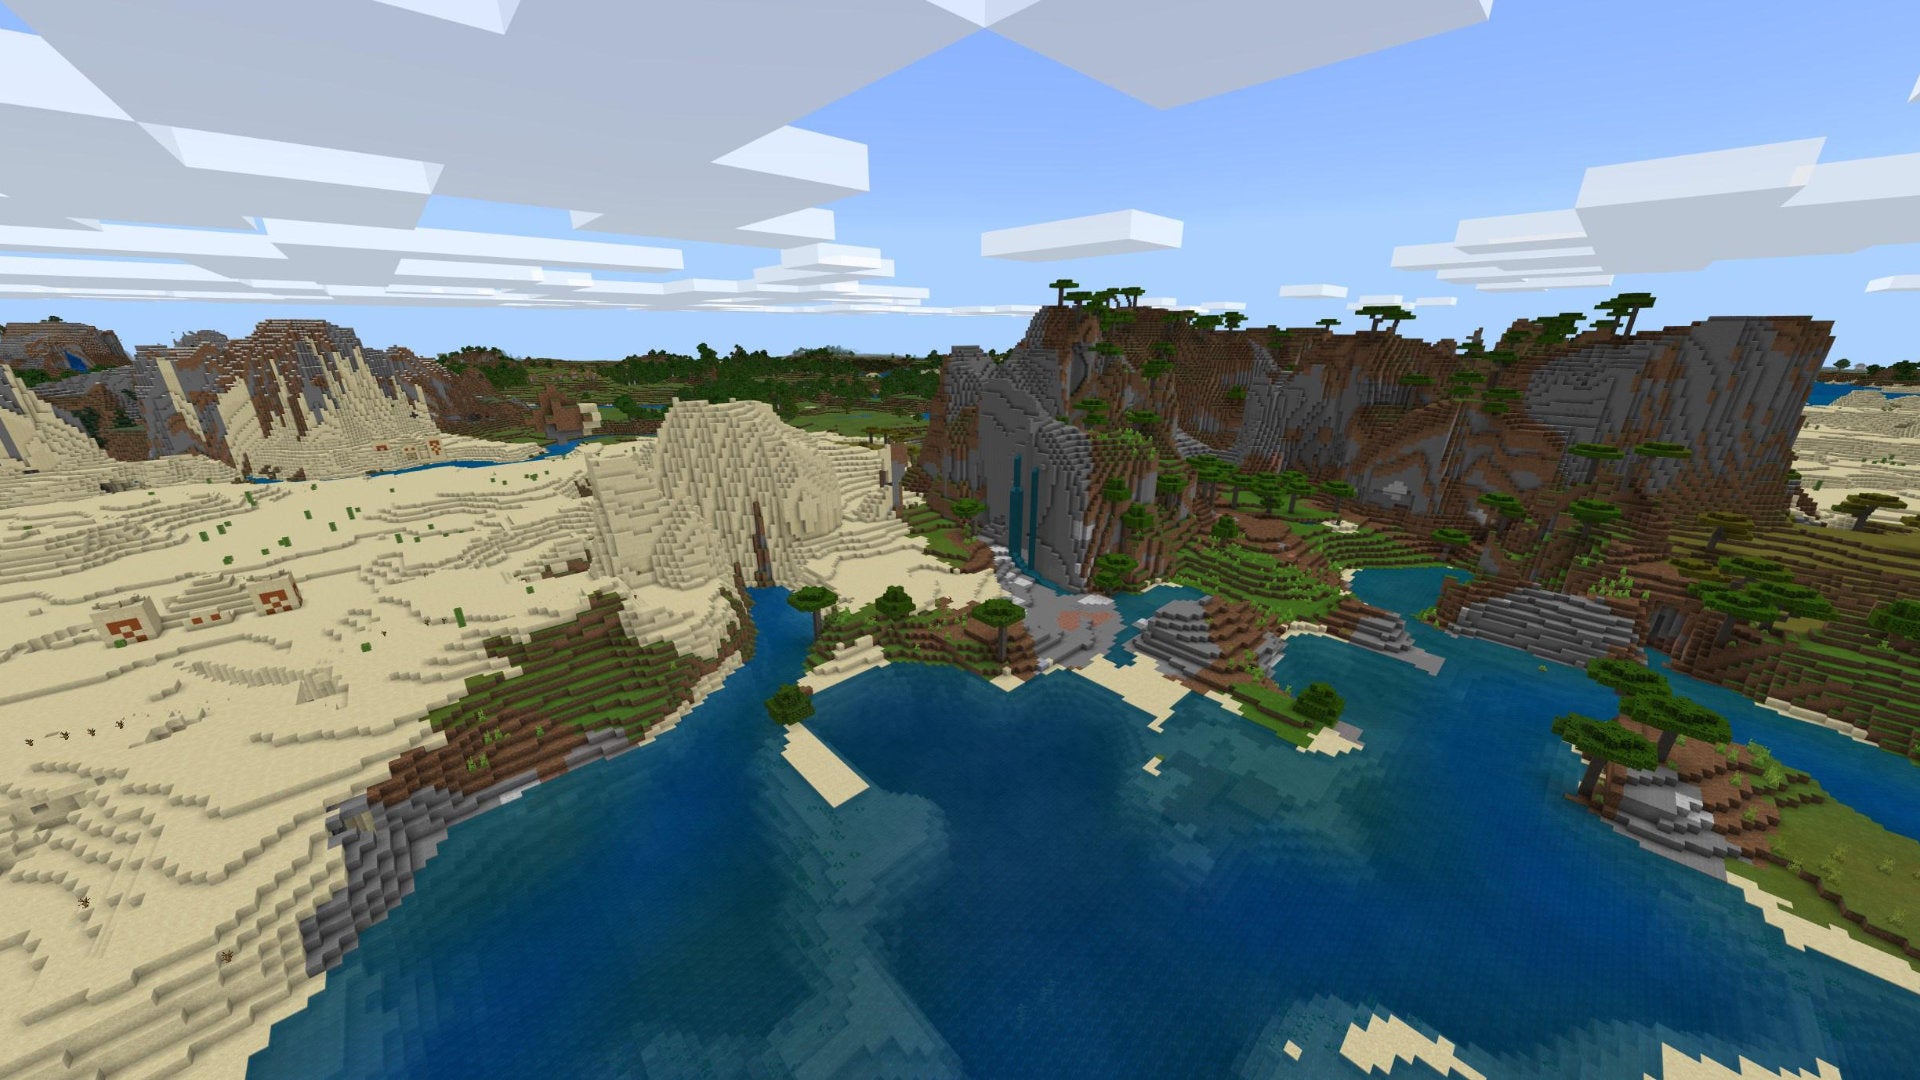 A Minecraft Bedrock screenshot of a new world created with the seed -1567484700.